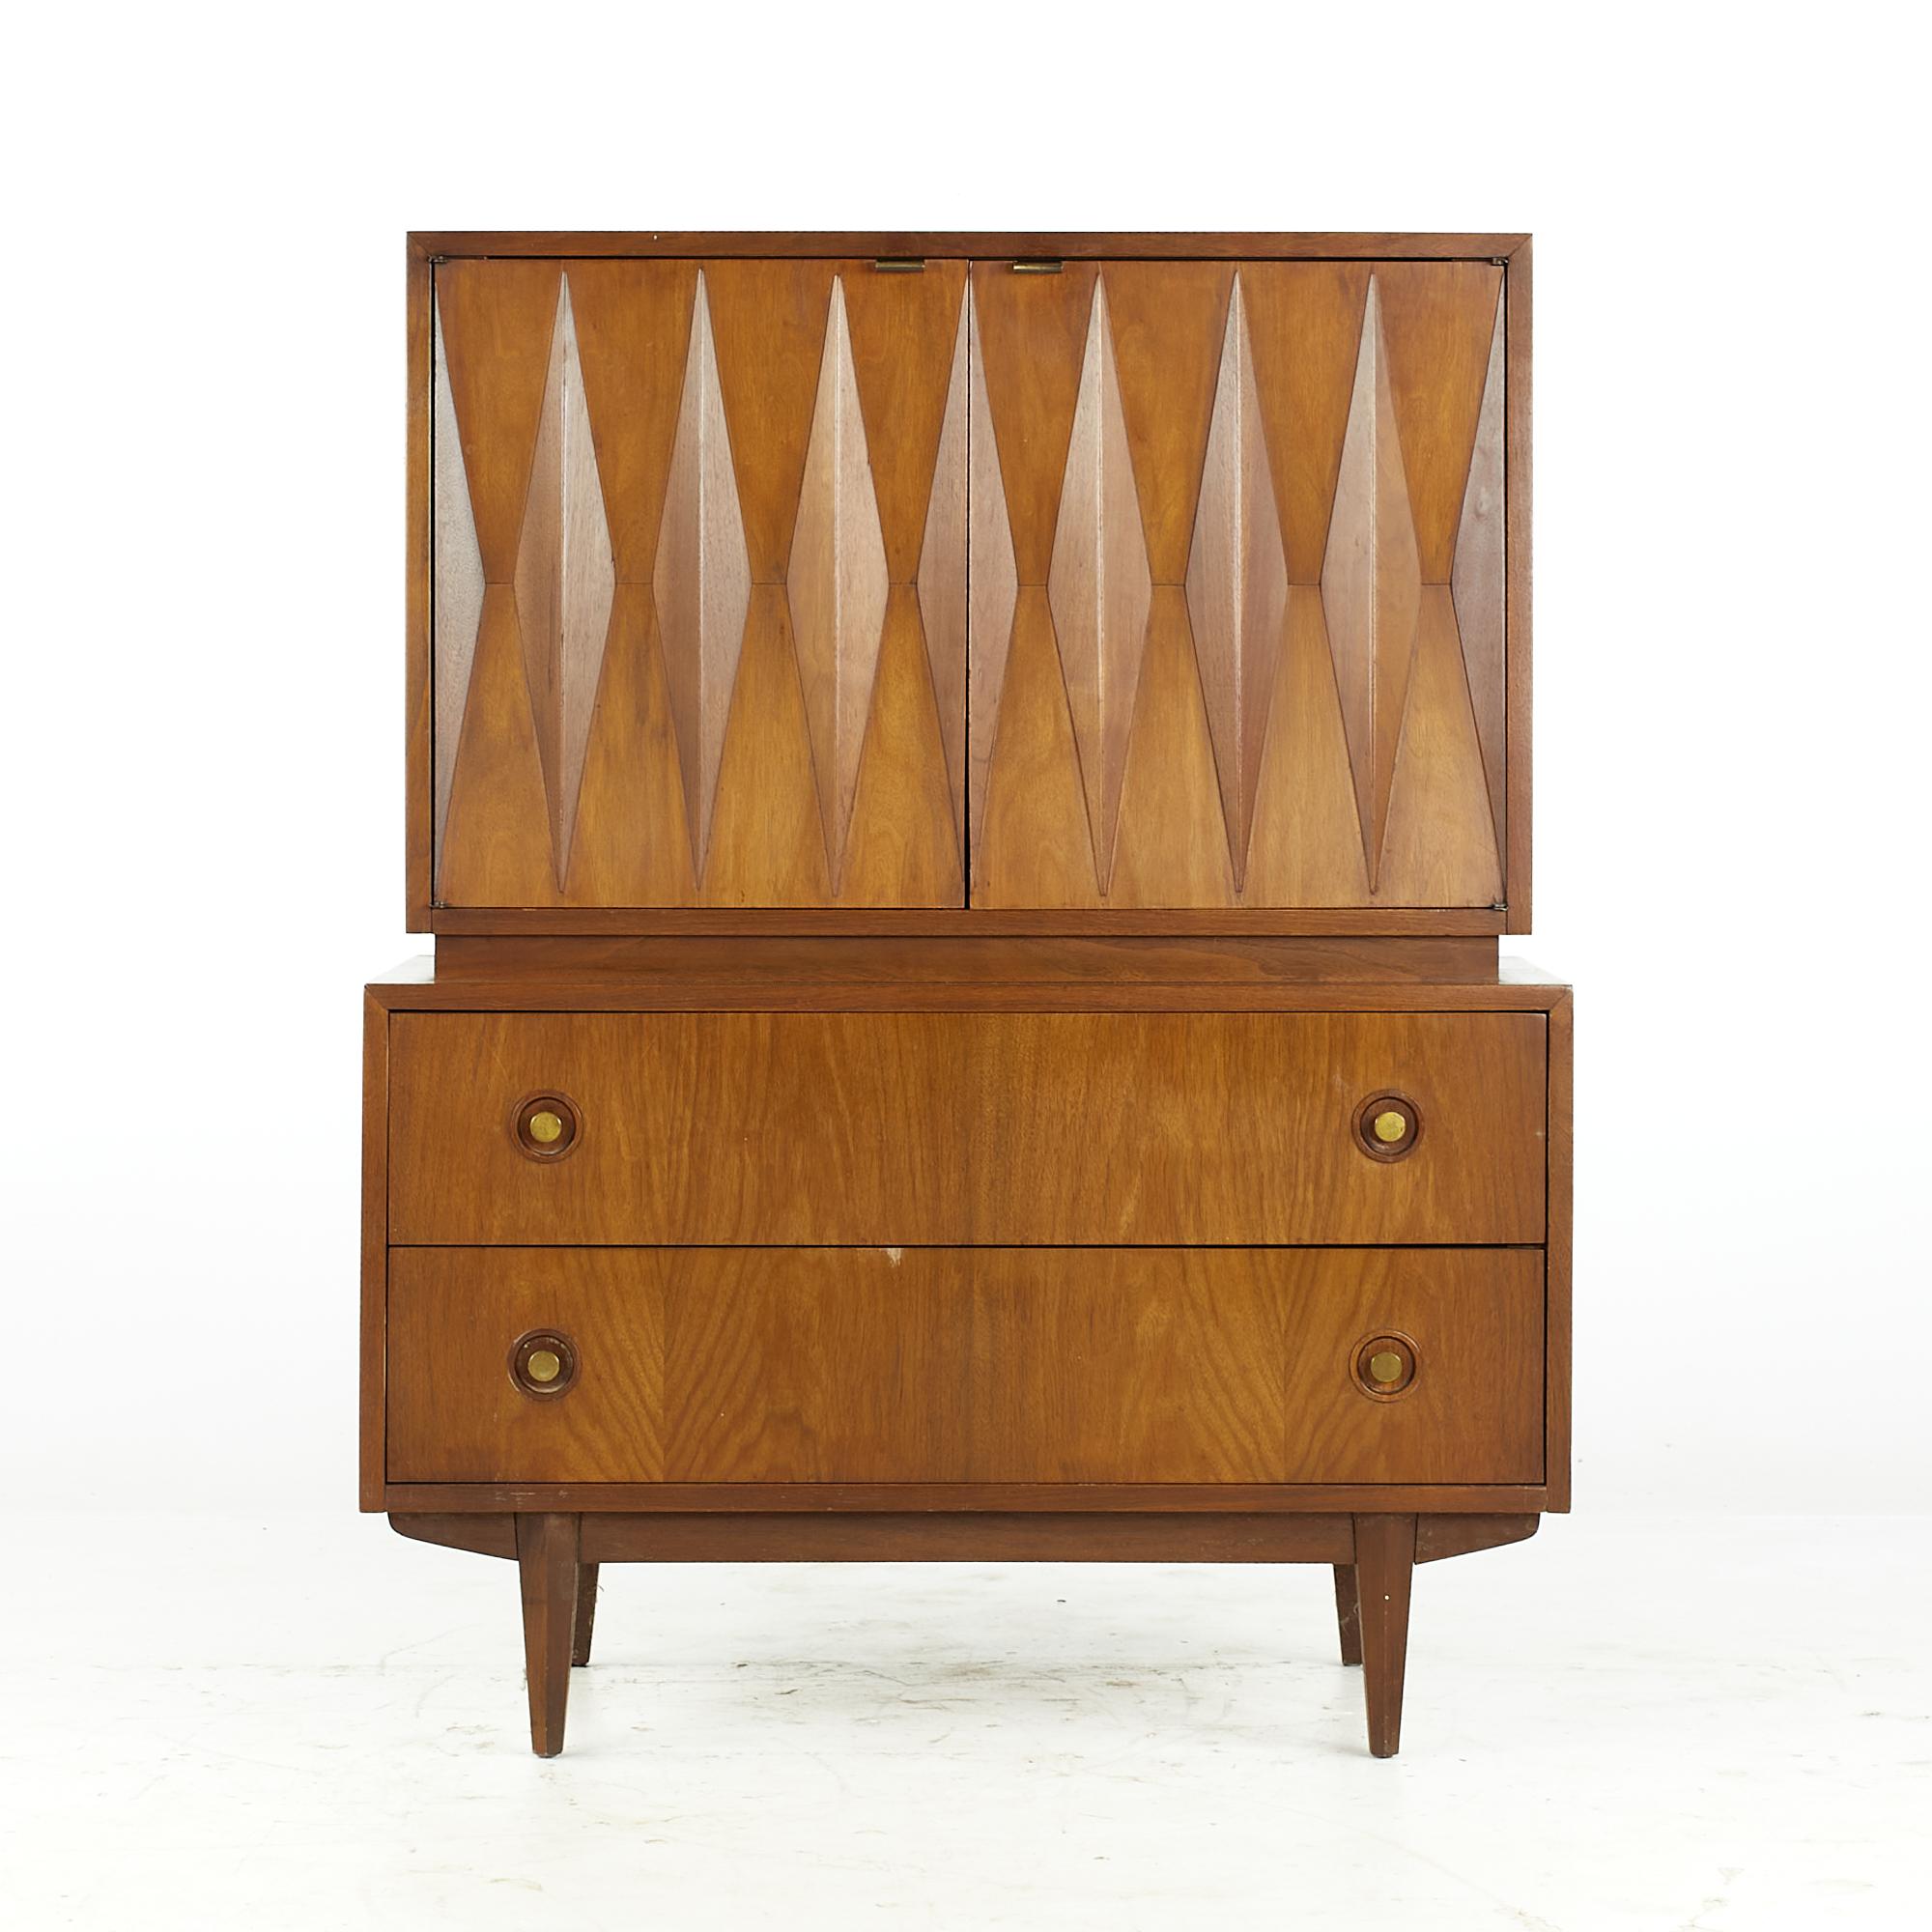 Albert Parvin for American of Martinsville midcentury Walnut and Brass Highboy Gentlemen's Chest Dresser

This gentlemen's chest measures: 38 wide x 18.5 deep x 48.5 inches high

All pieces of furniture can be had in what we call restored